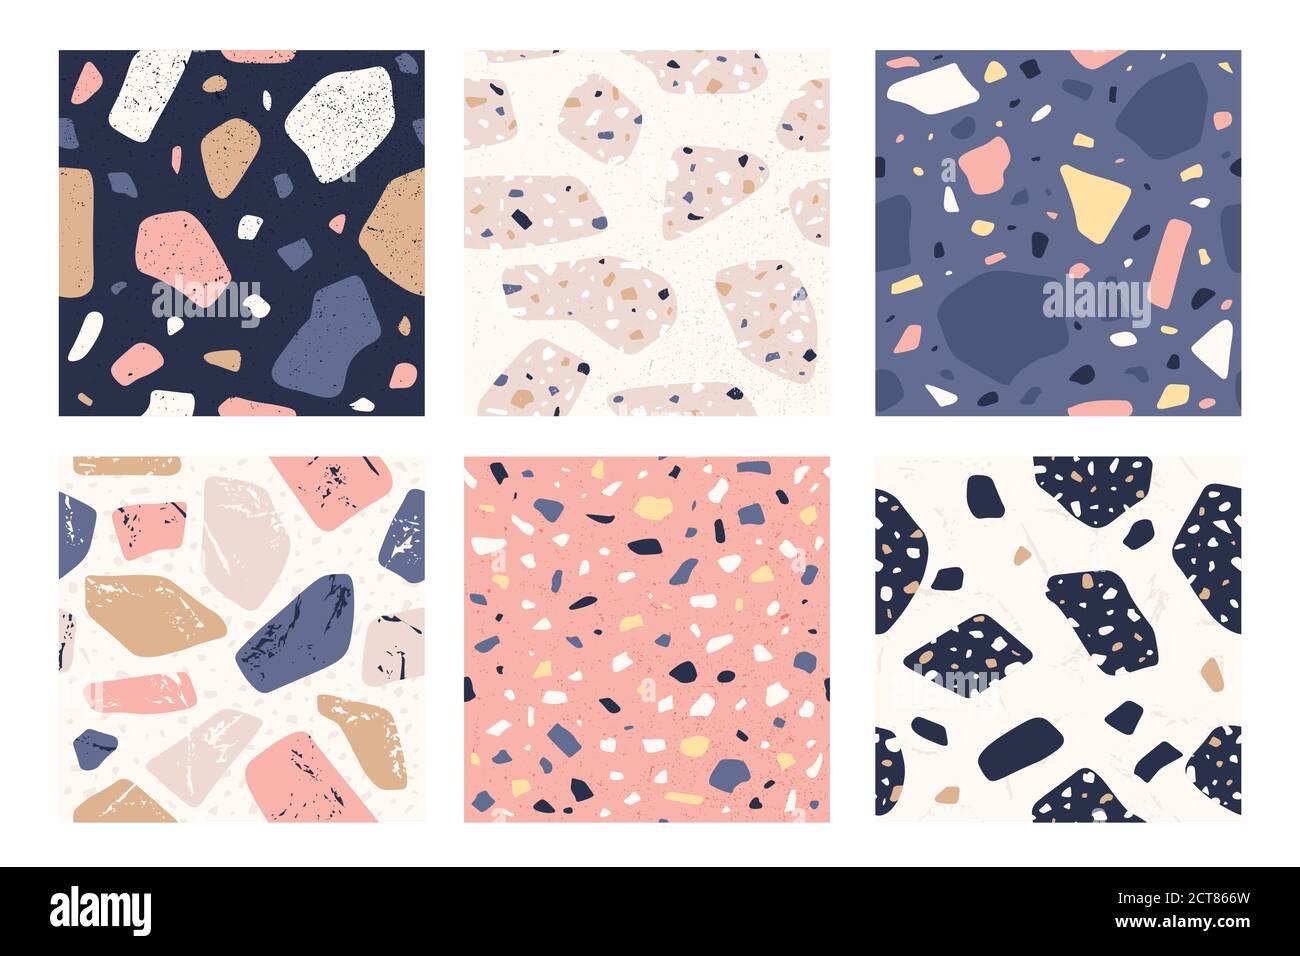 Terrazzo seamless pattern. Italian decorative stone tile with chaotic stains, granite mosaic textured shapes repeating sample vector set. Illustration Stock Vector